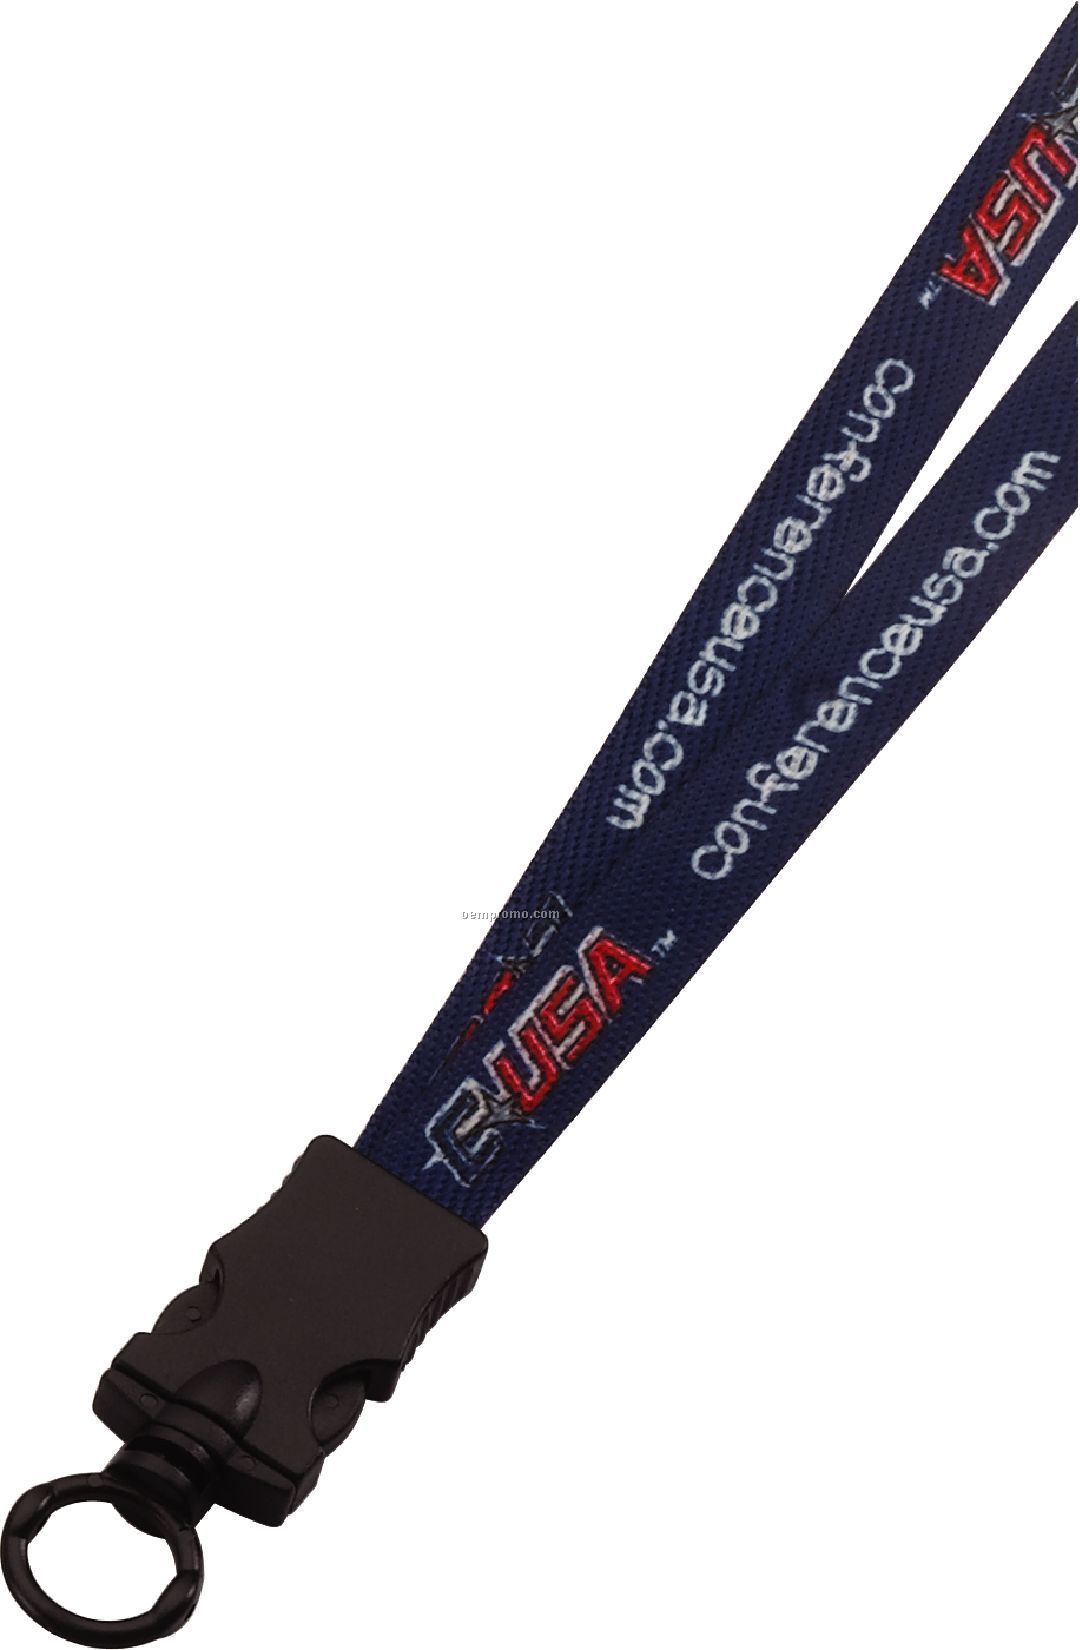 1/2" Rpet Waffle Weave Dye Sublimated Lanyard W/Snap Buckle Release & Oring